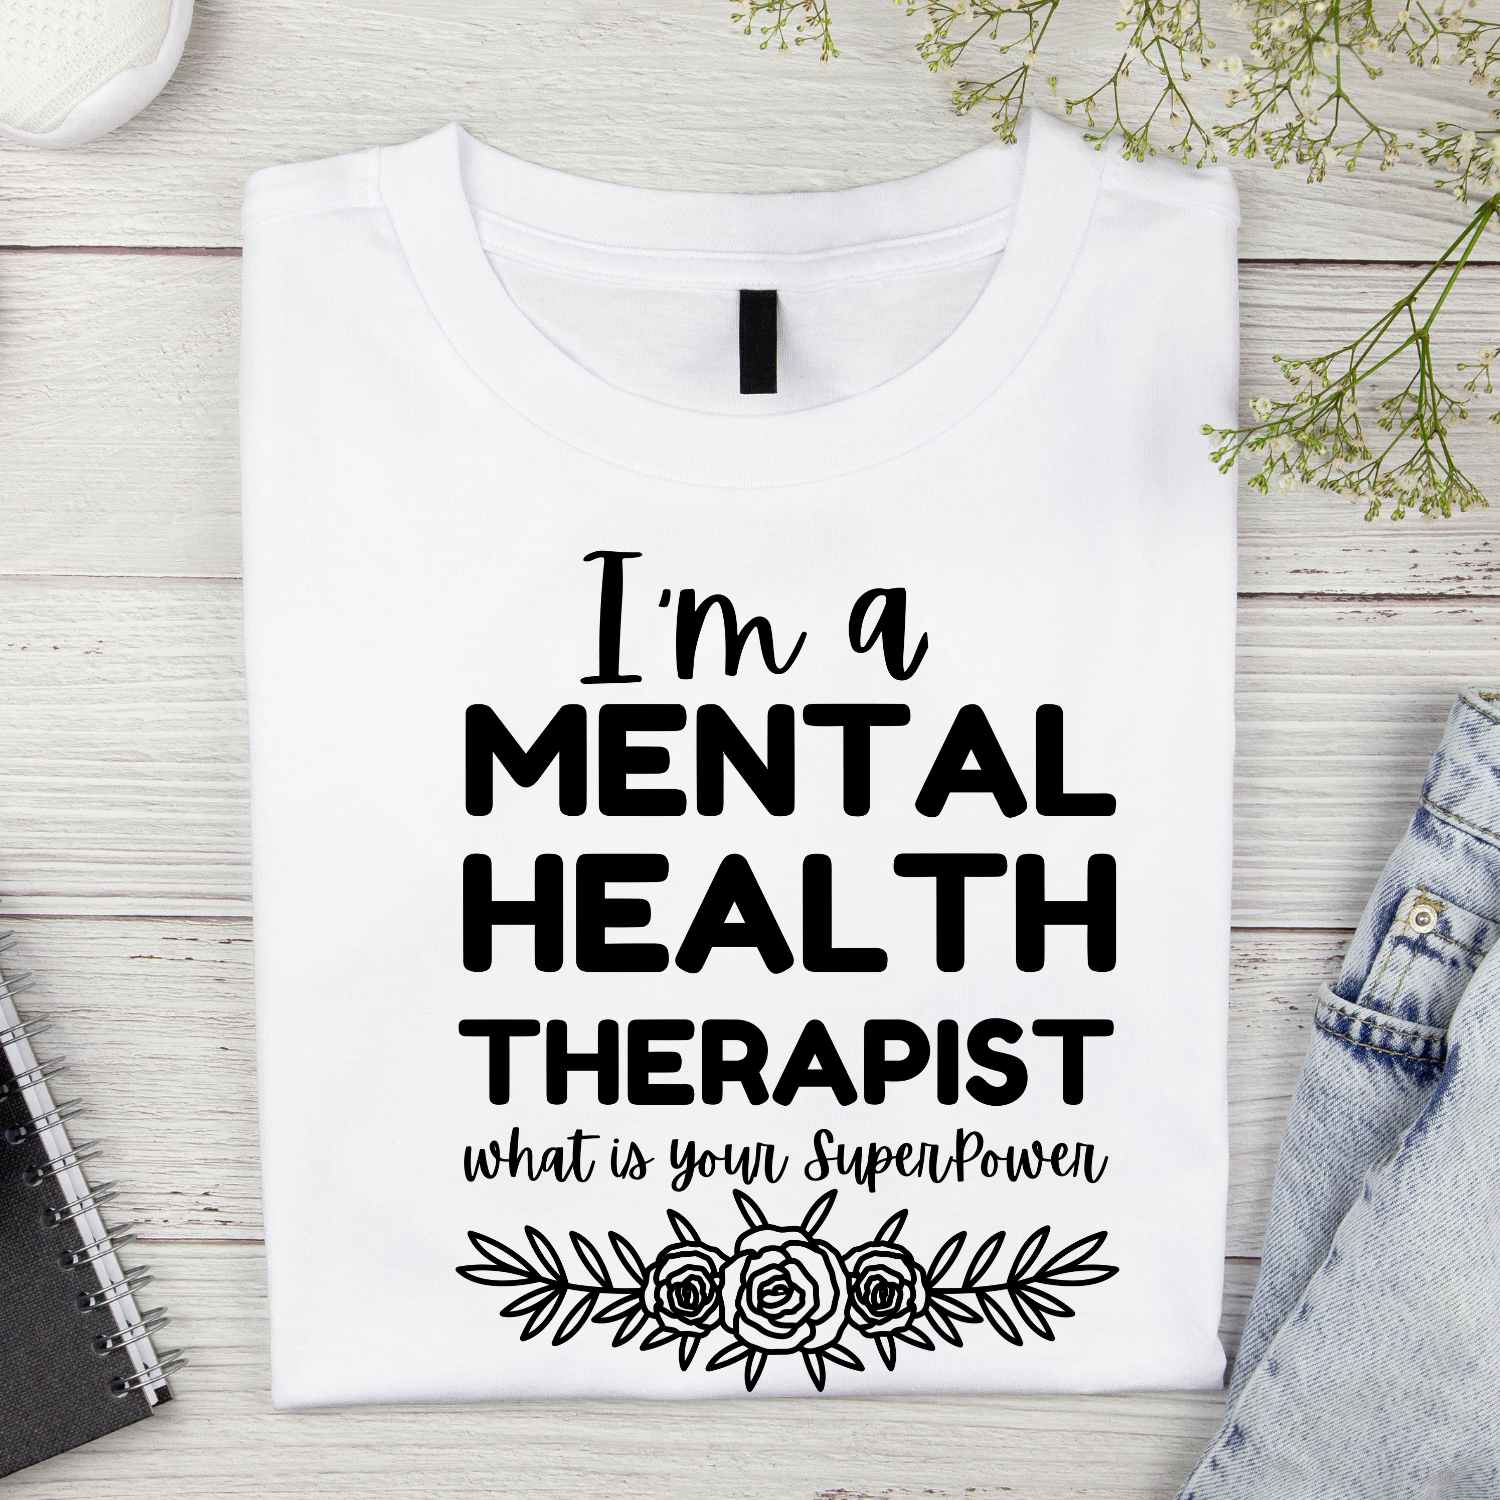 I am a Mental Health Therapist what is your Superpower T-shirt Design